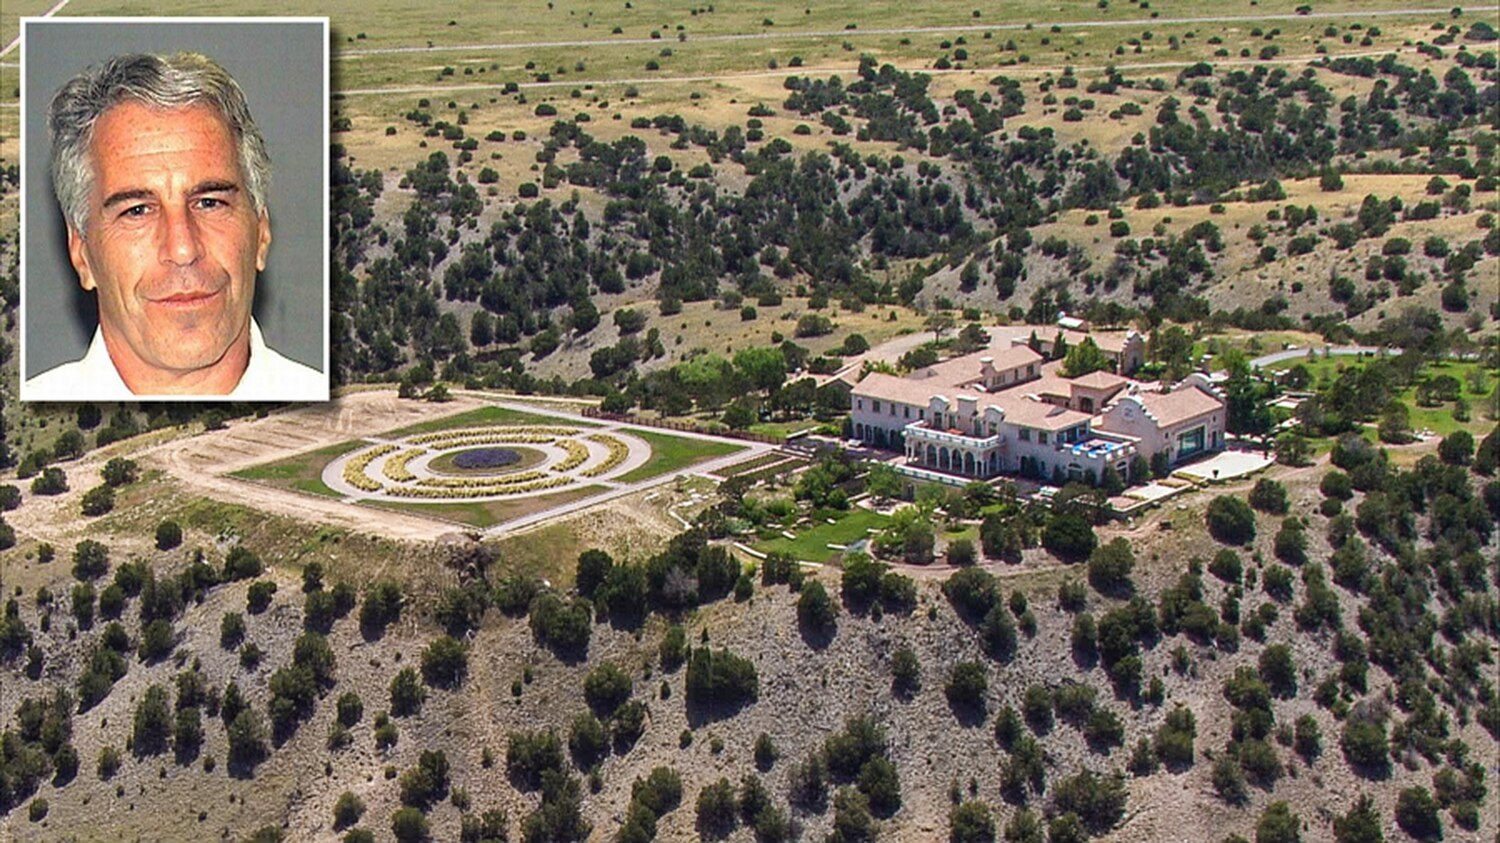 maxewell News1-MAIN-epstein-mansion-2019-new-mexico-Credit-KRQE